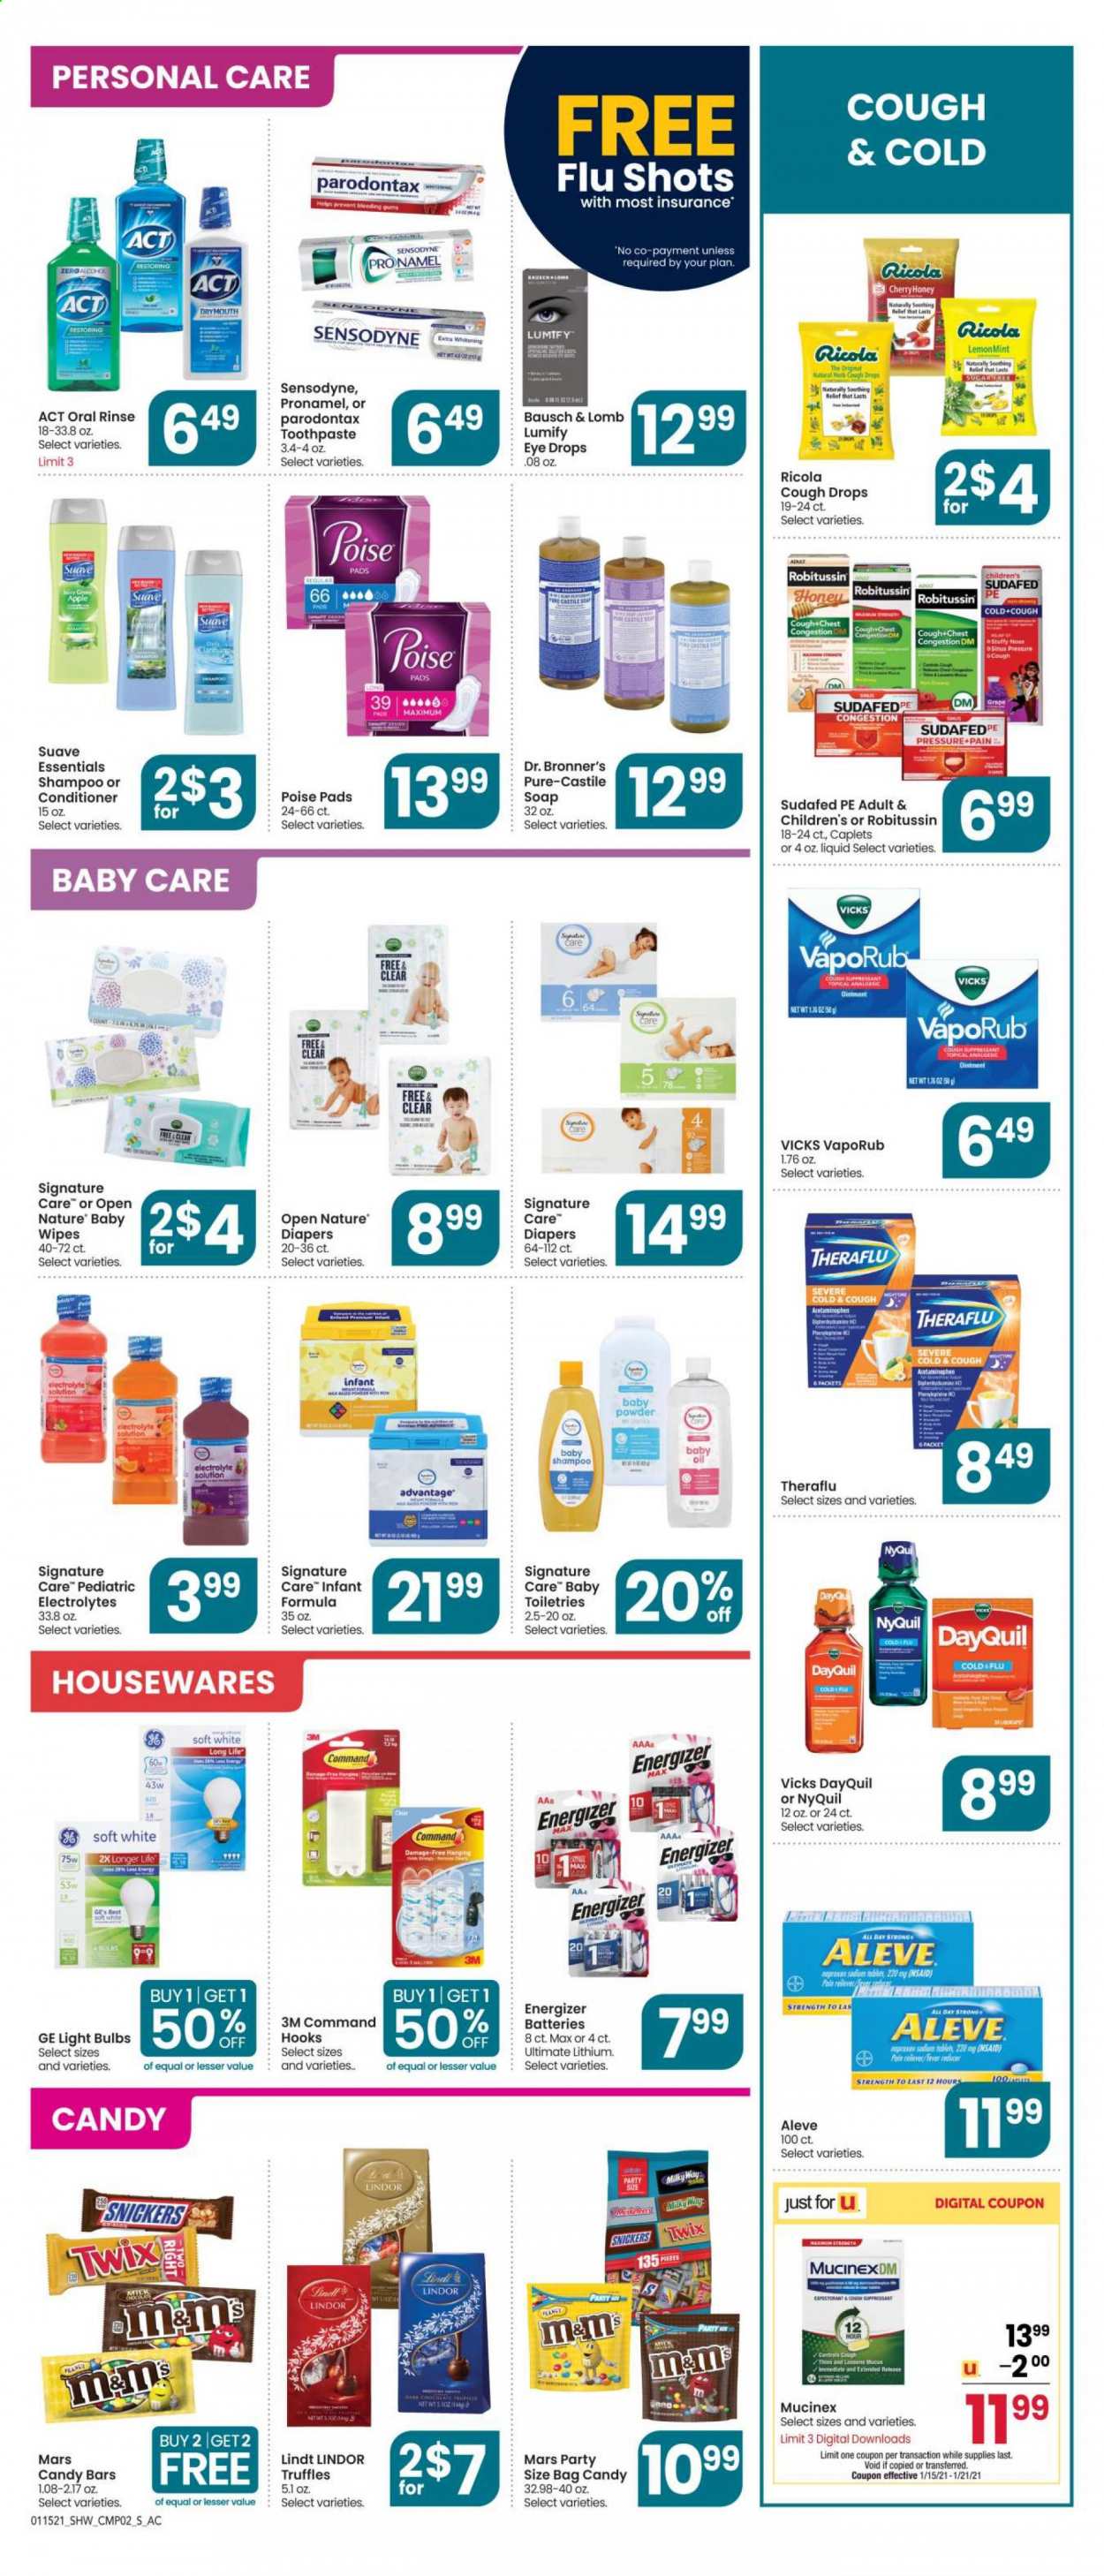 thumbnail - Shaw’s Flyer - 01/15/2021 - 01/21/2021 - Sales products - ricola, Lindt, Lindor, Milky Way, Snickers, Twix, Mars, truffles, M&M's, Thins, wipes, shampoo, Suave, soap, toothpaste, Sensodyne, ointment, conditioner, hook, pen, battery, bulb, Energizer, light bulb, Aleve, DayQuil, Cold & Flu, Mucinex, Robitussin, Sudafed, Theraflu, NyQuil, Lumify, eye drops, VapoRub, Vicks, cough drops. Page 6.